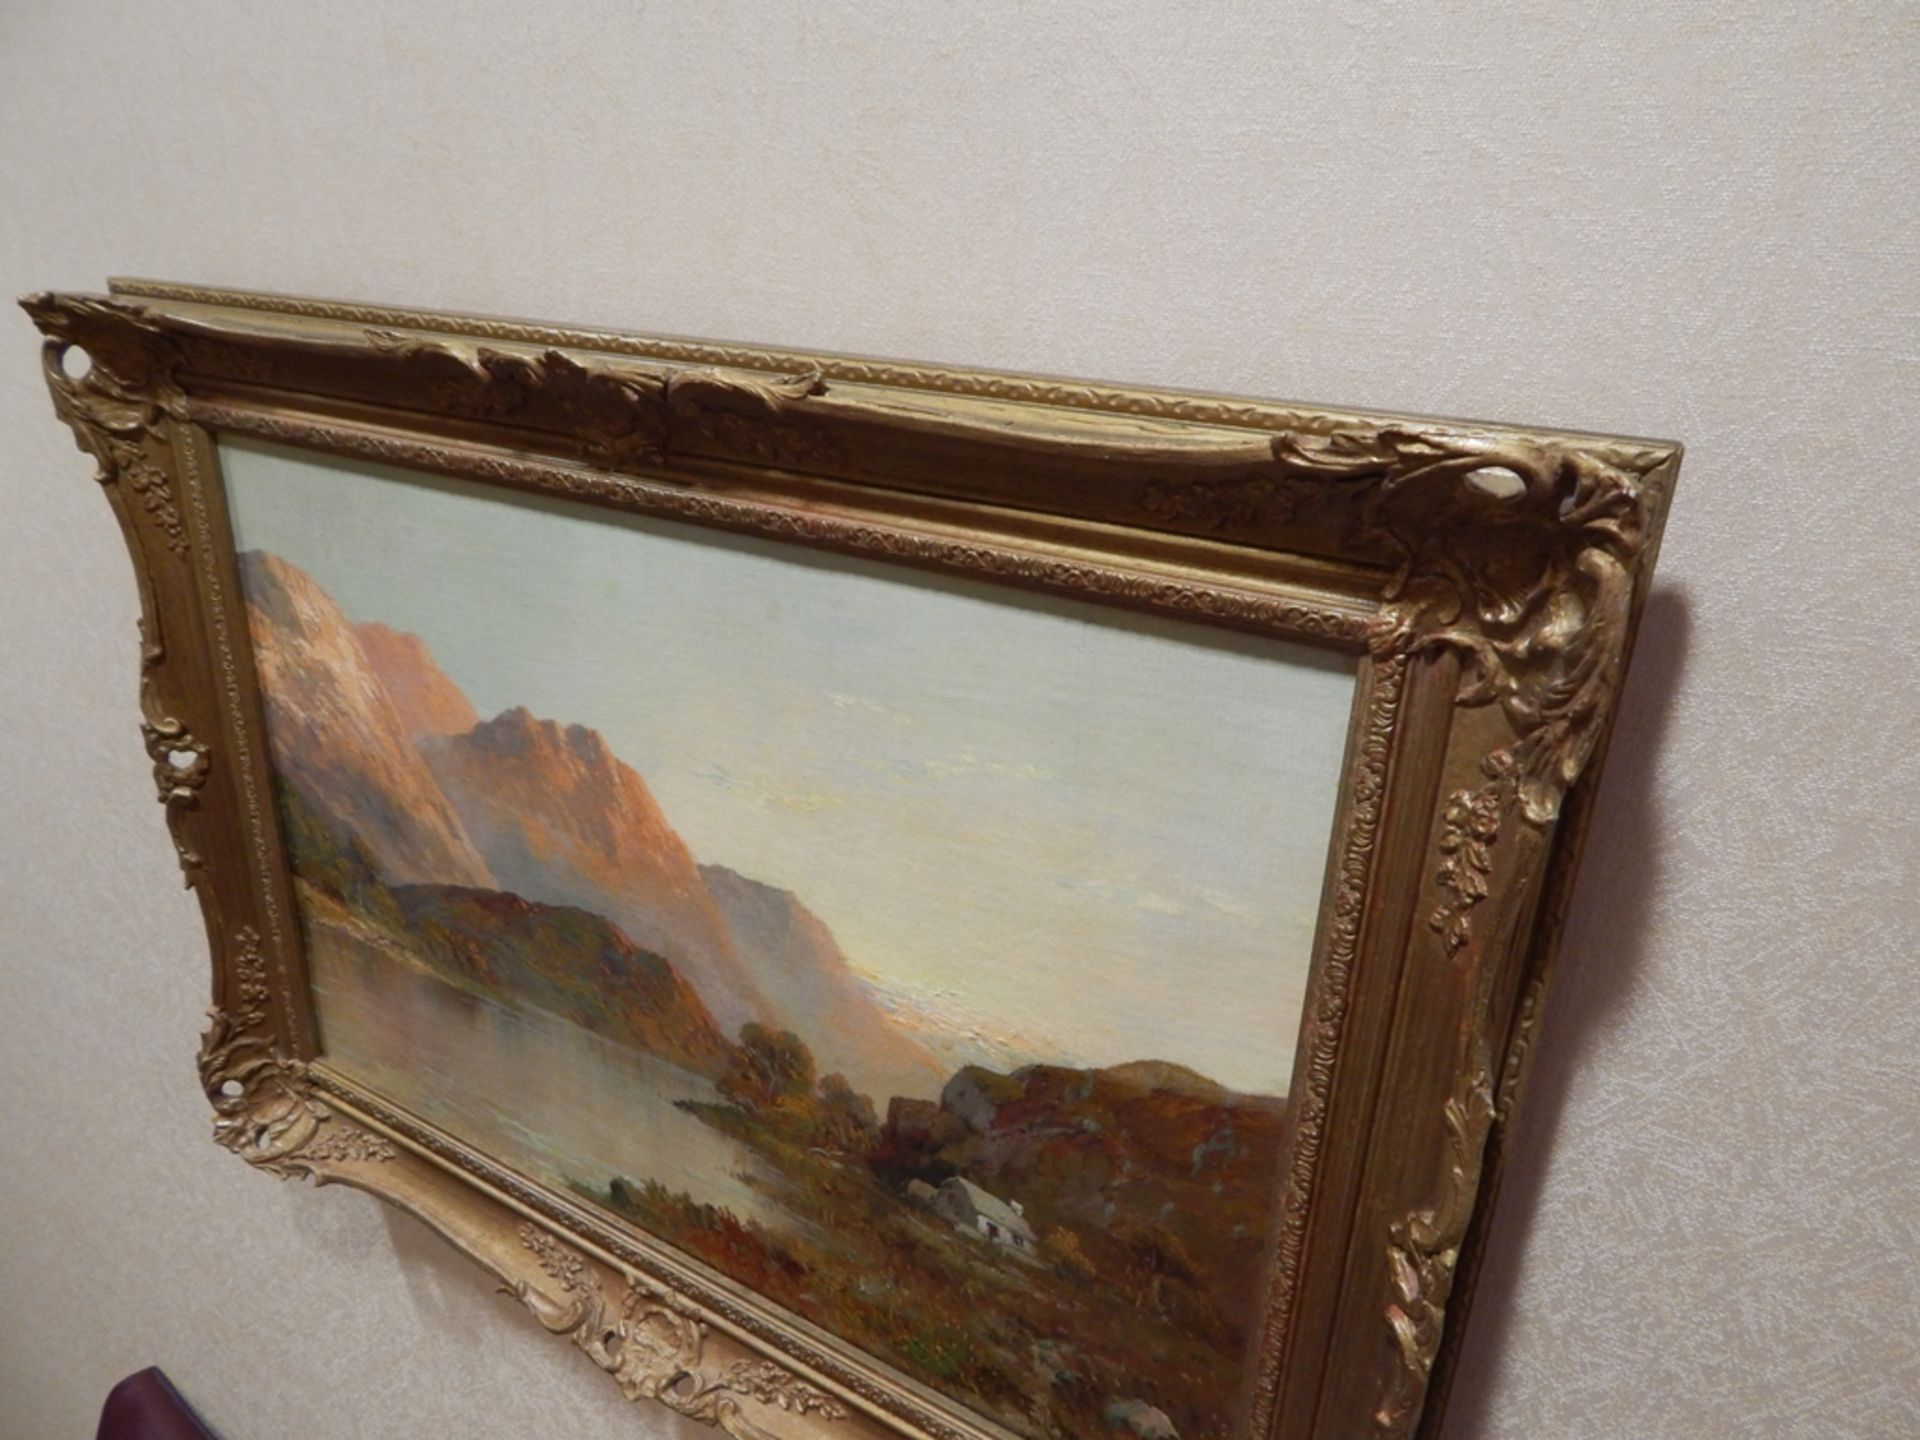 Lake and Mountain Oil on Canvas Painting, approximately 23 in x 15 in, Possible F. E. Jamieson - Image 3 of 5